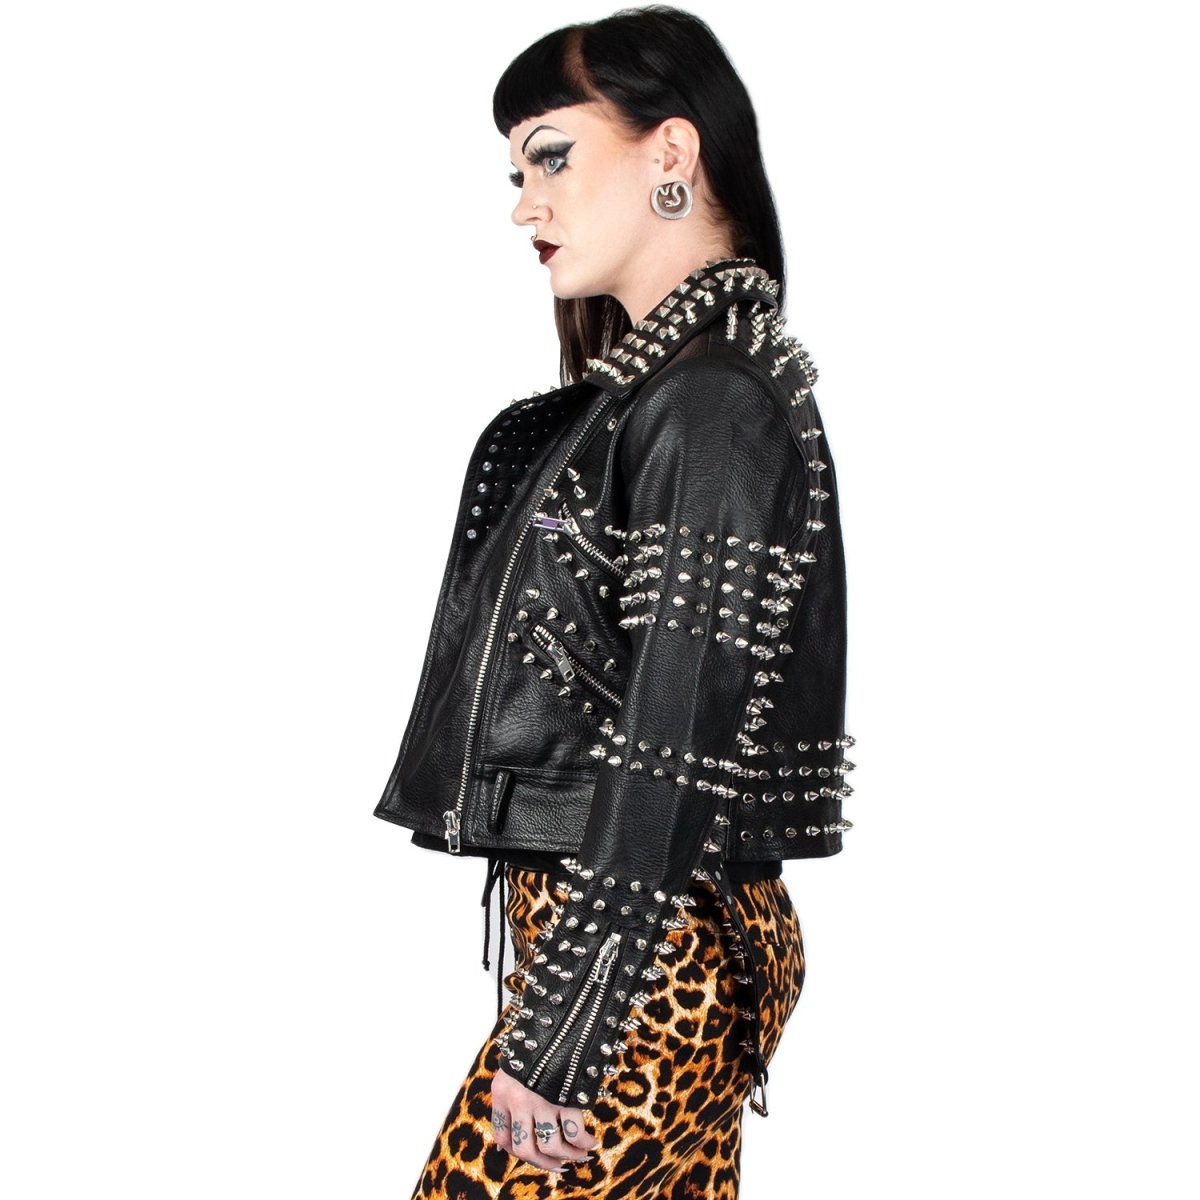 Too Fast | Orchid Bloom | Heavy Metal Studded Leather Jacket